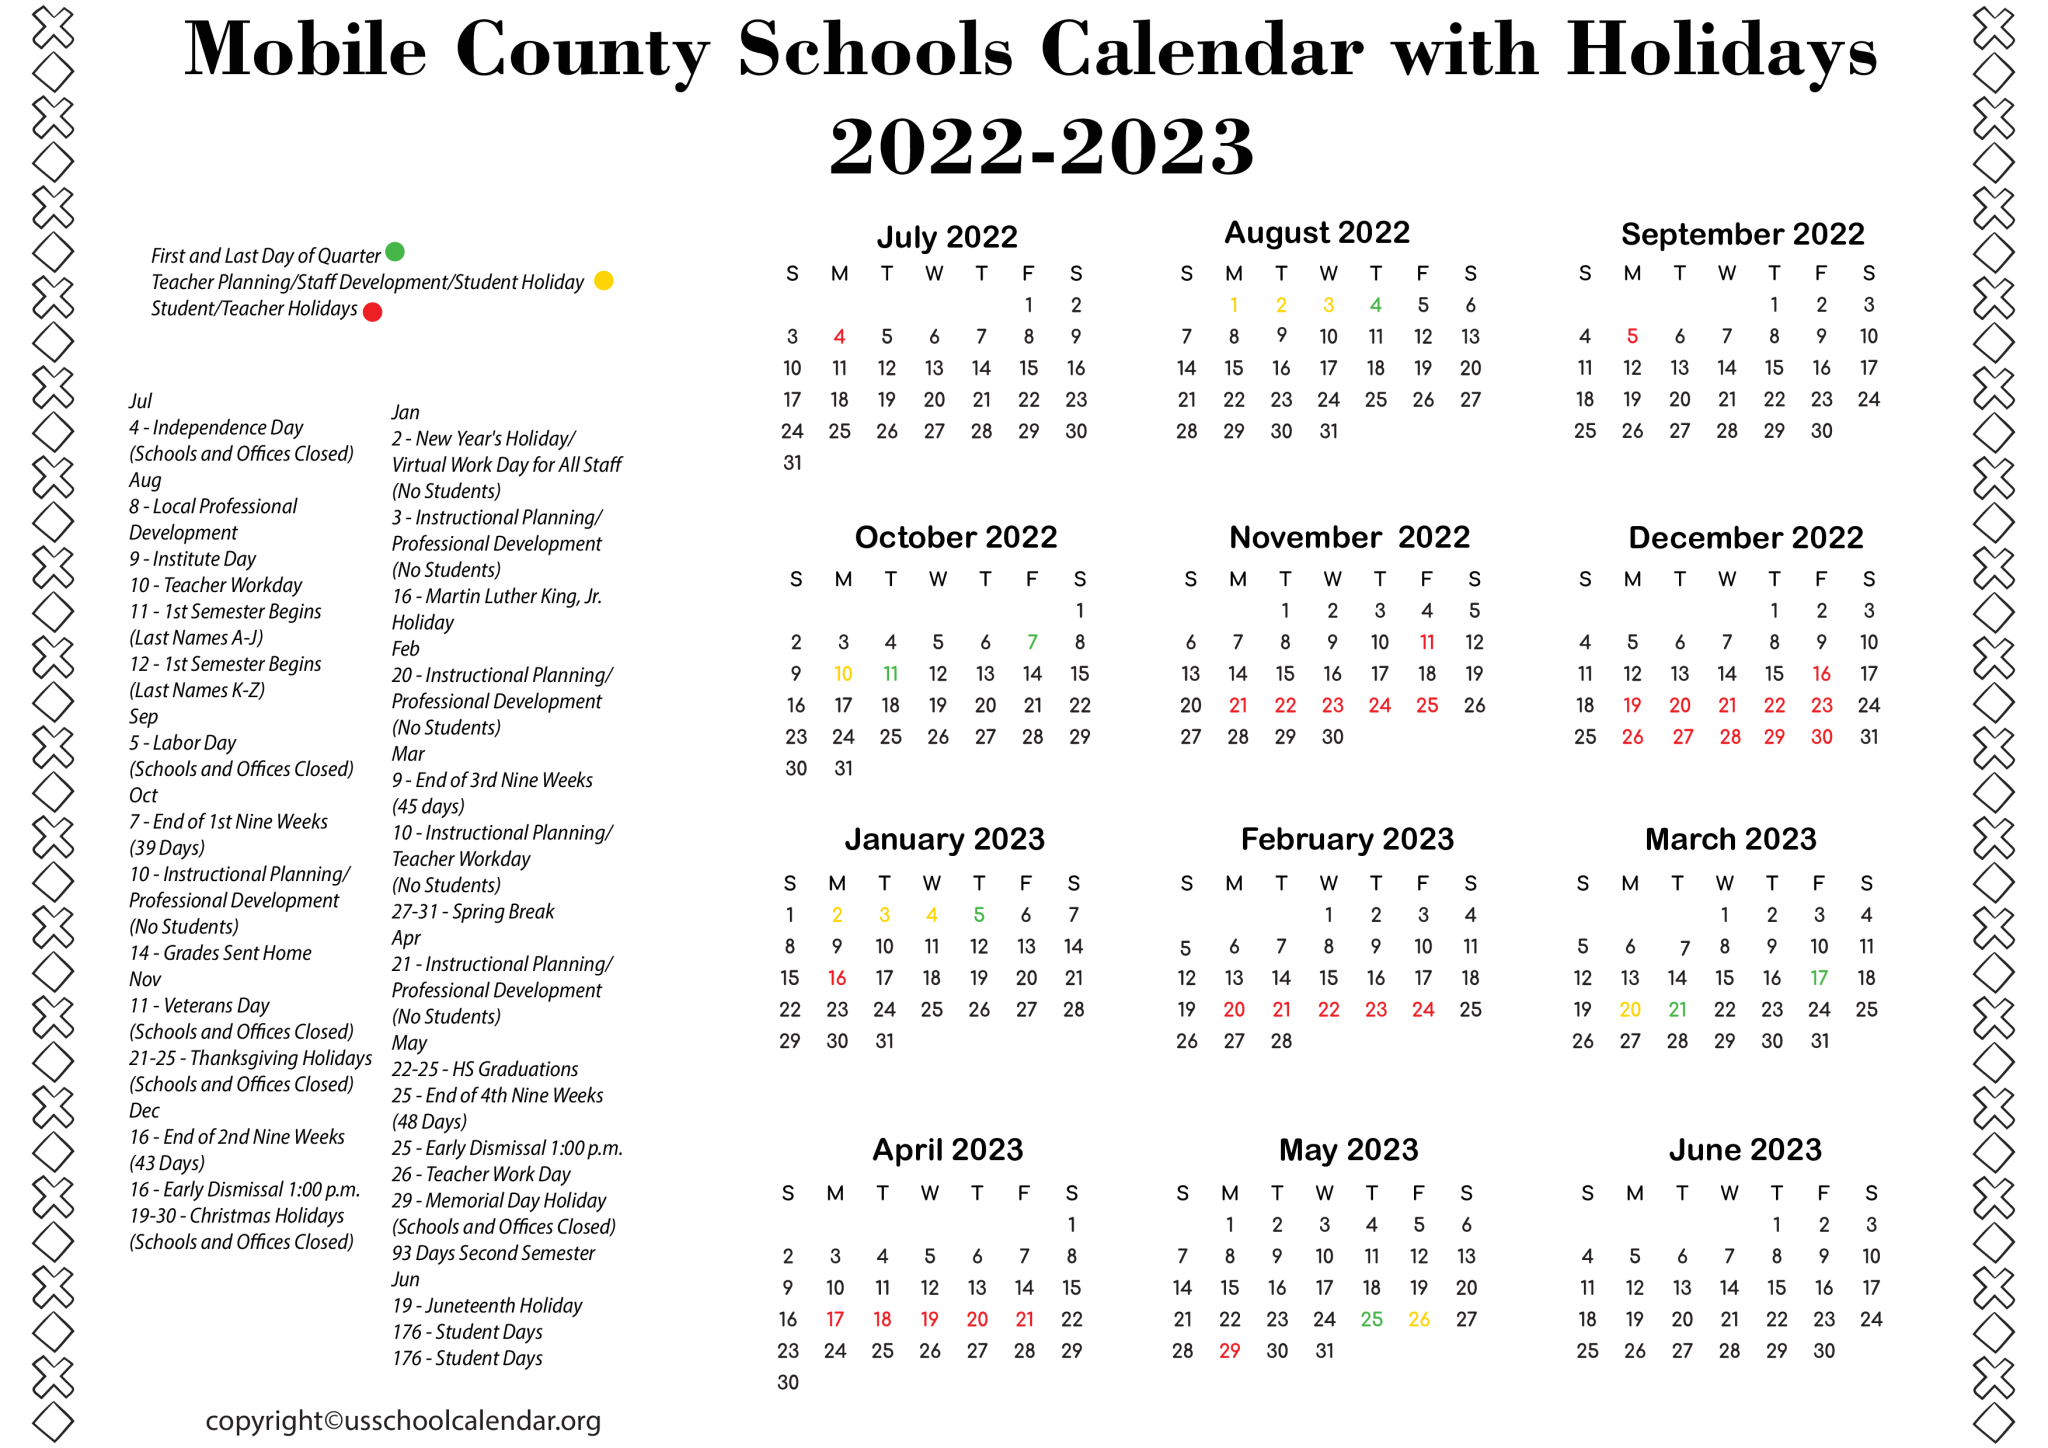 MCPSS Mobile County Schools Calendar with Holidays 2023